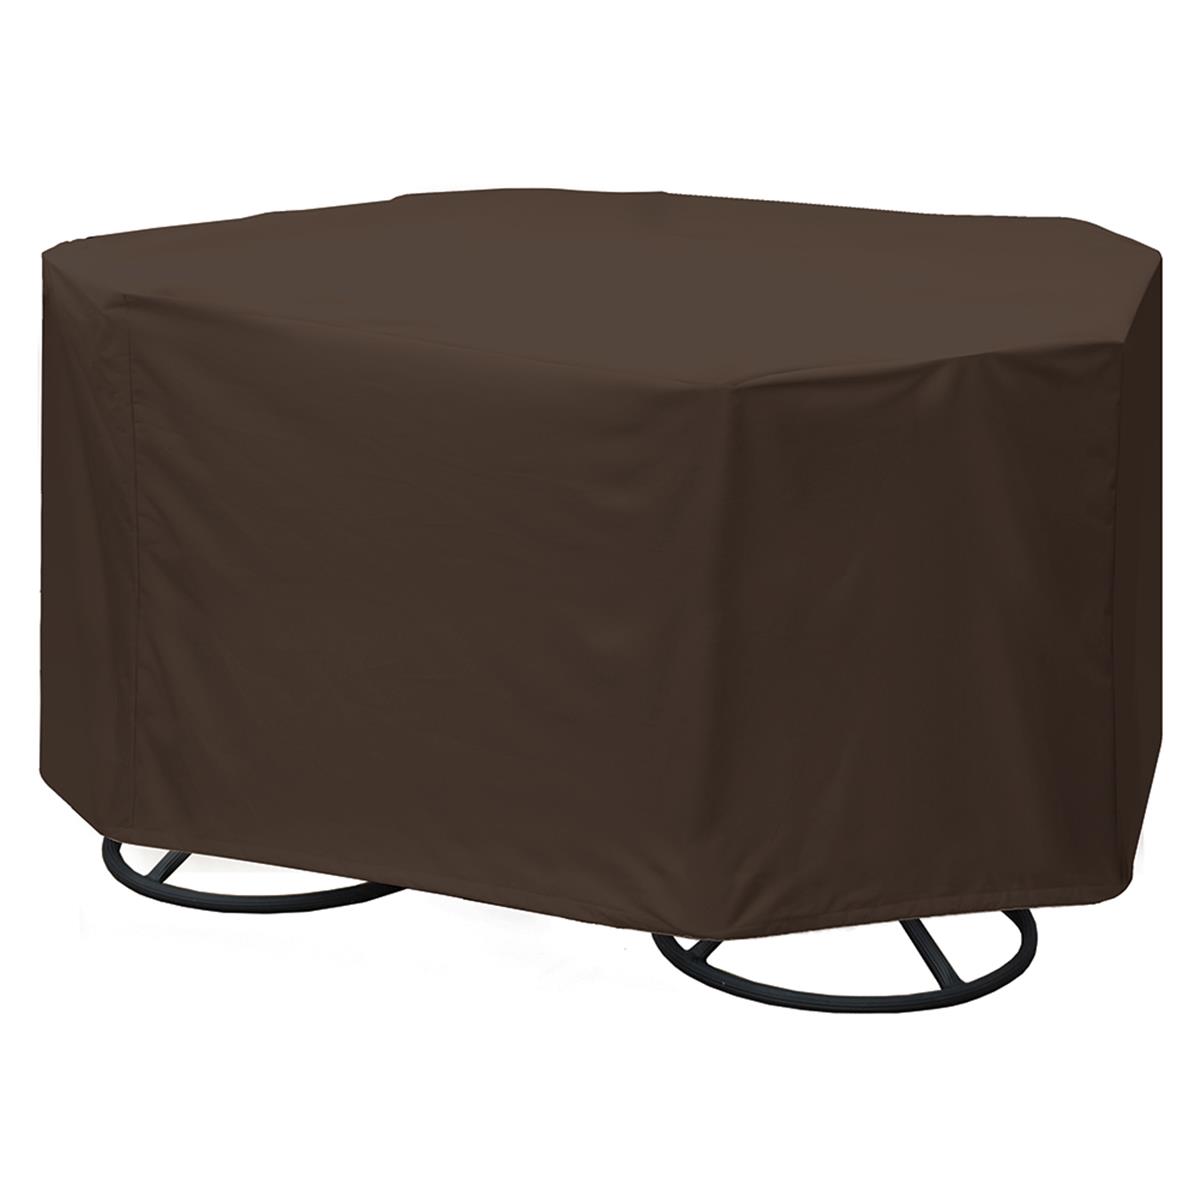 100538806 4-chair 600 Denier Rip Stop Patio Dining Set Cover